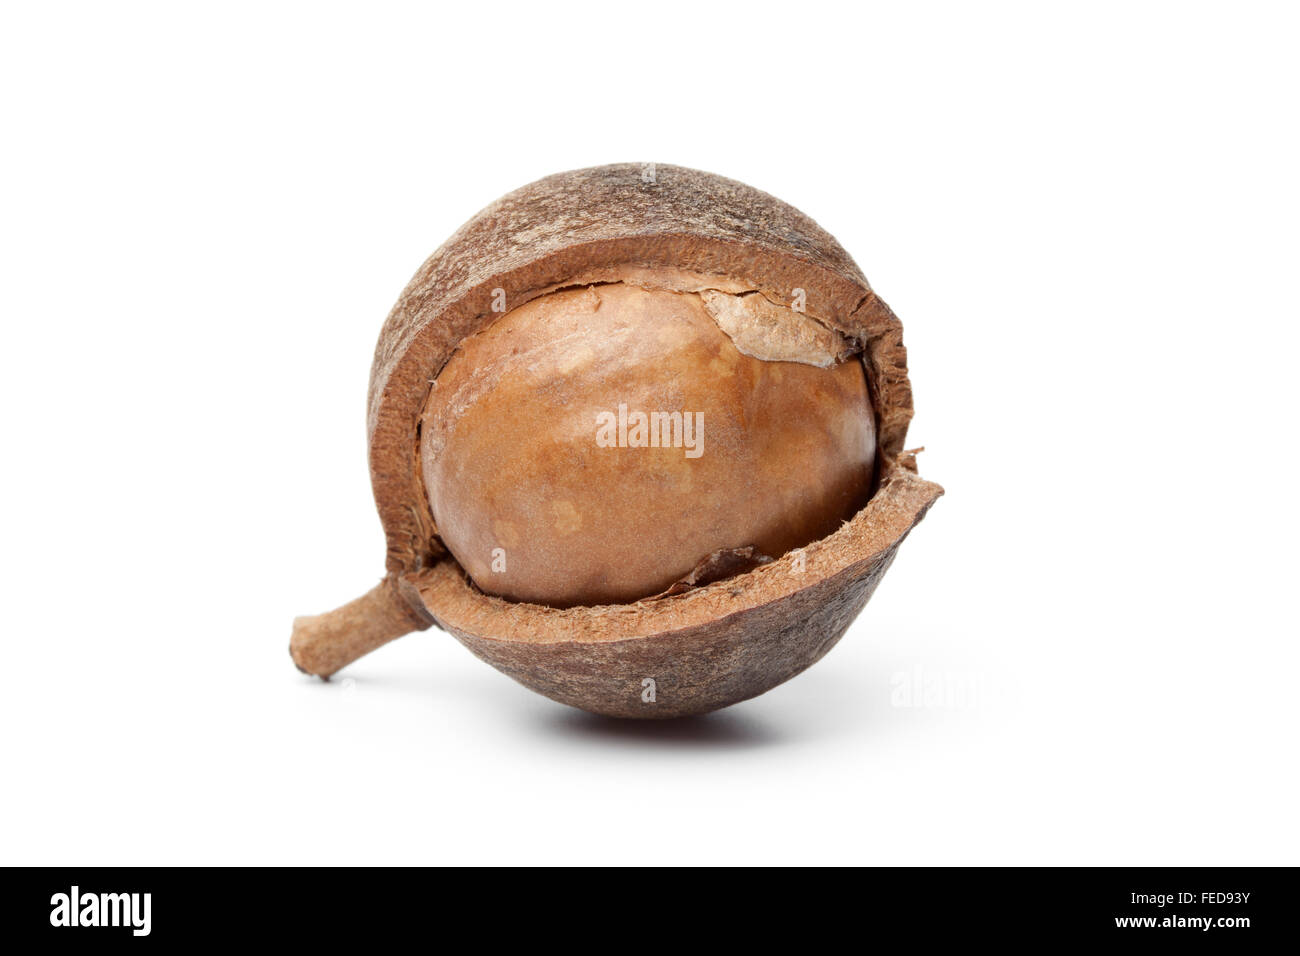 Macadamia nut in a broken shell on white background Stock Photo